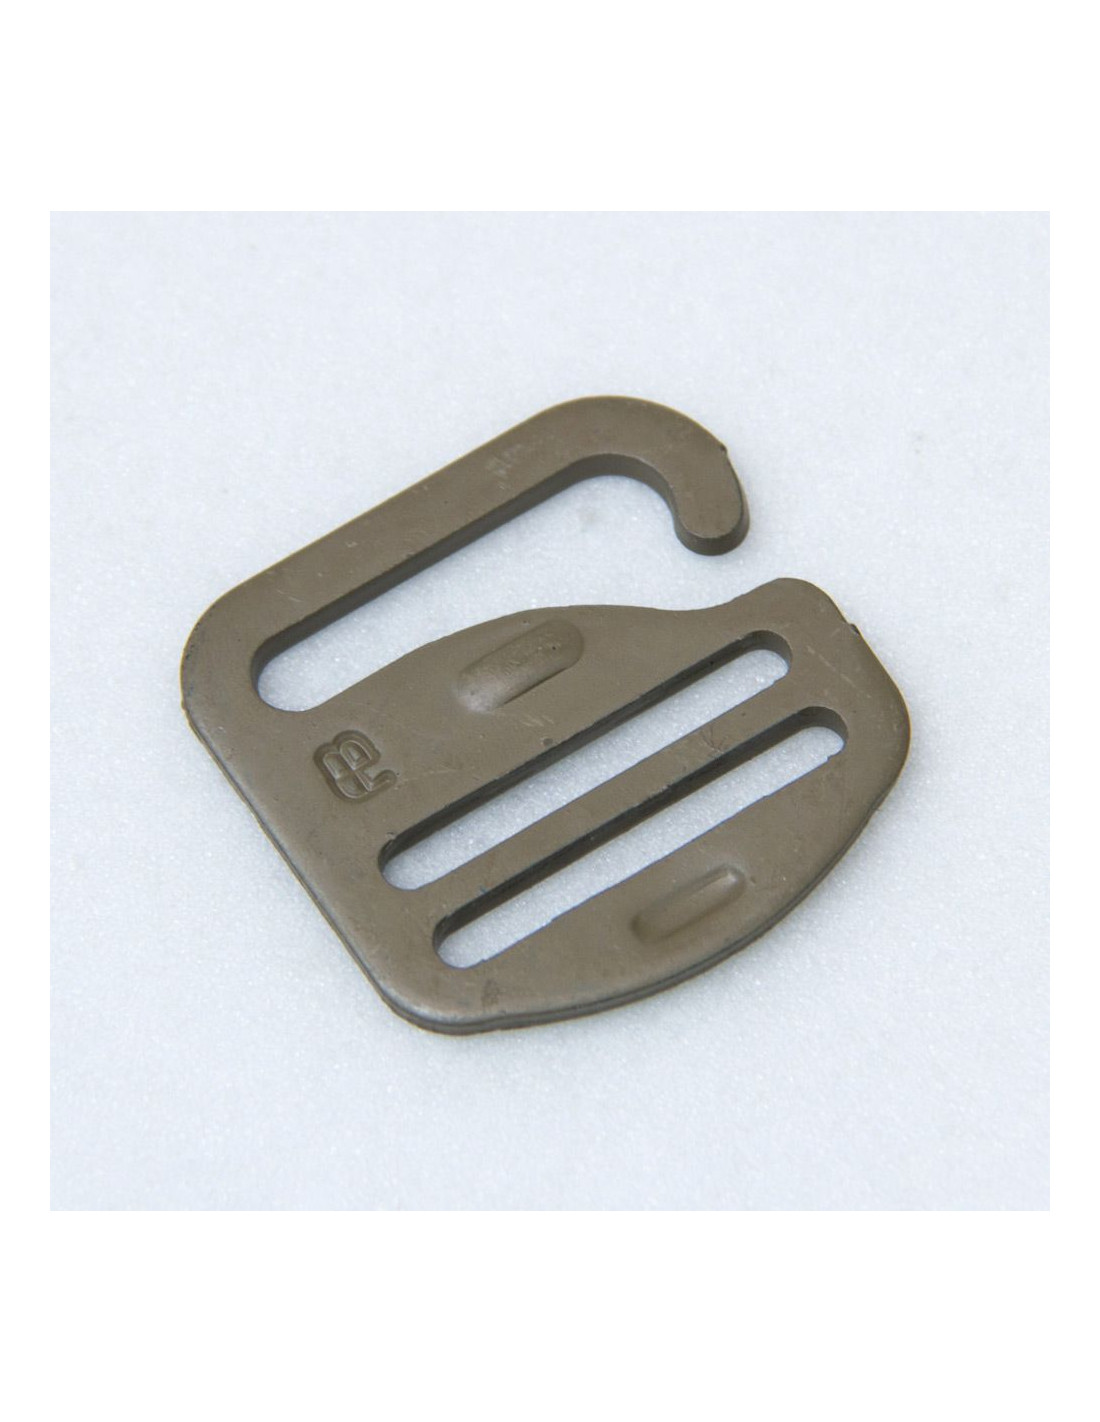 Titanium G Hook Quick Release Buckle for Cordage and Straps – Woods Monkey